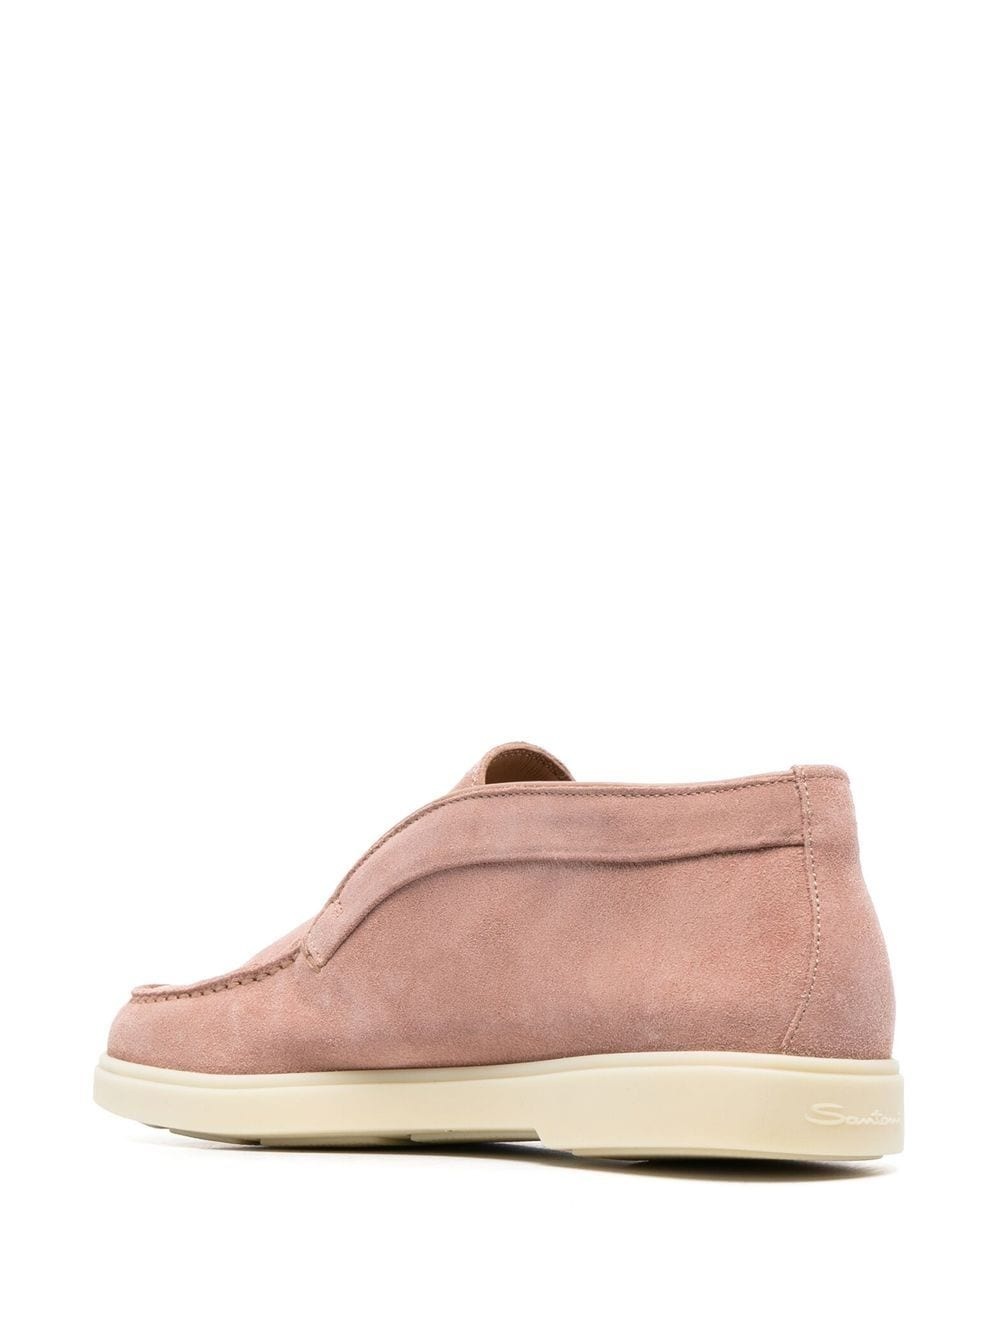 slip-on loafers - 3